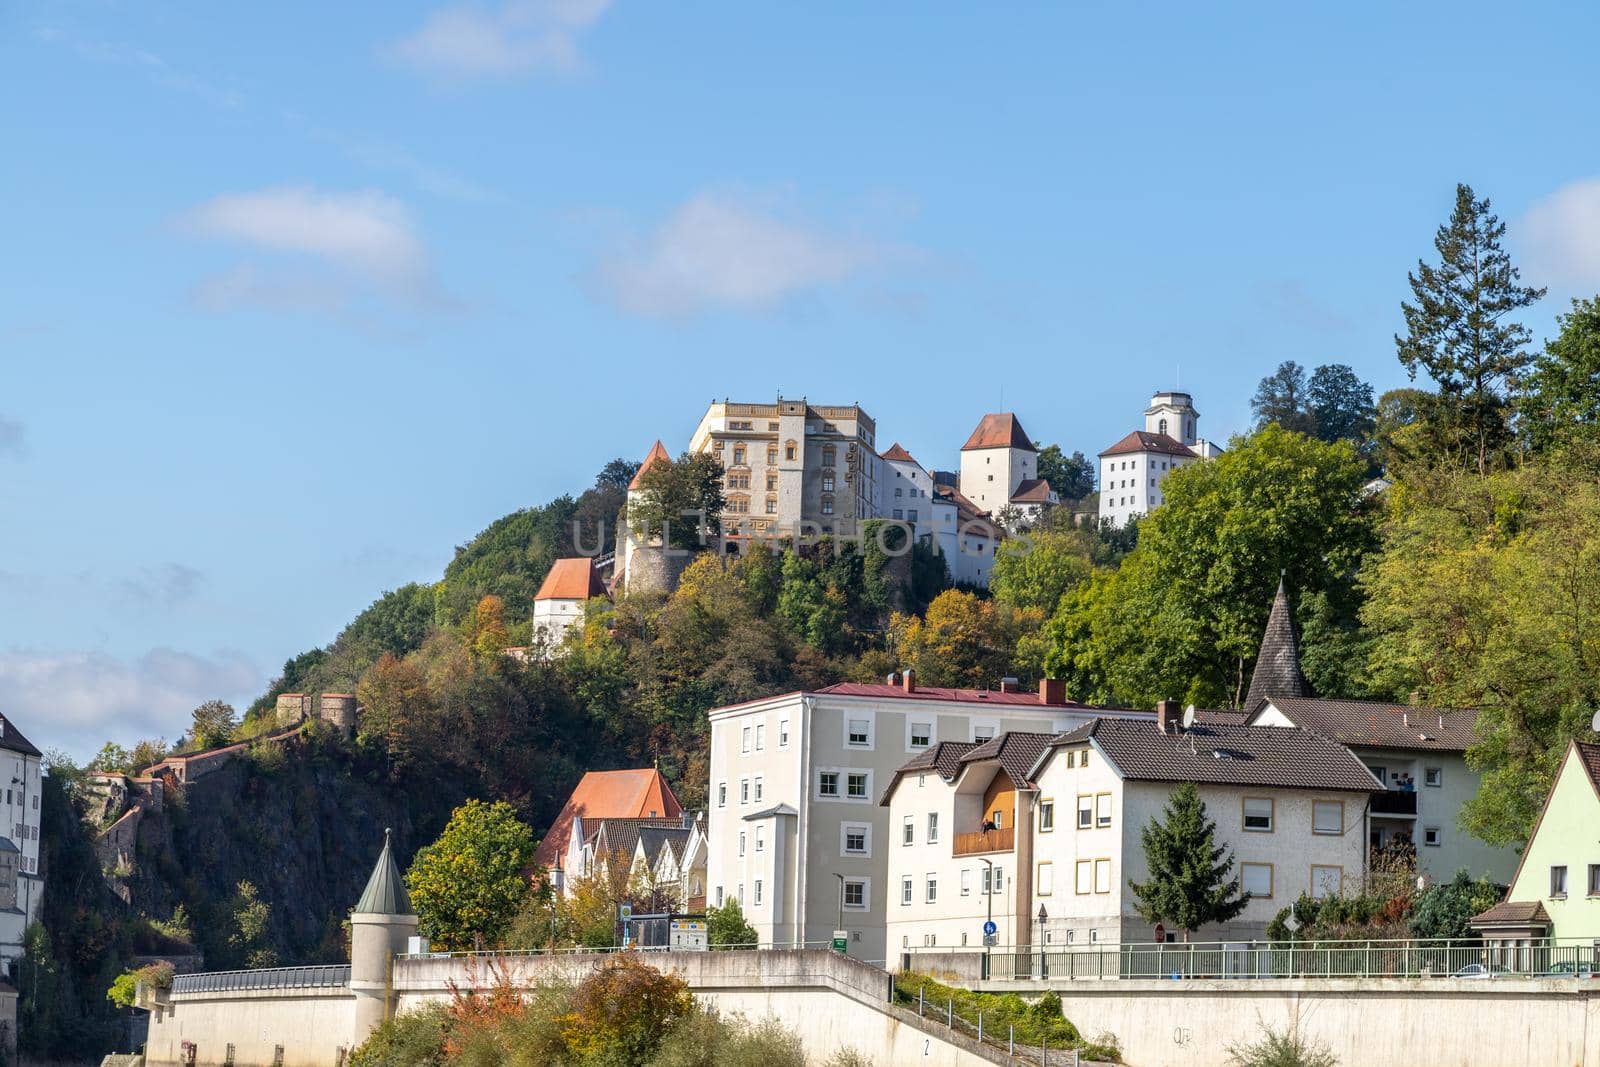 View at Fortress Veste Oberhaus and buildings on Danube shore in Passau, Bavaria, Germany in autumn by reinerc